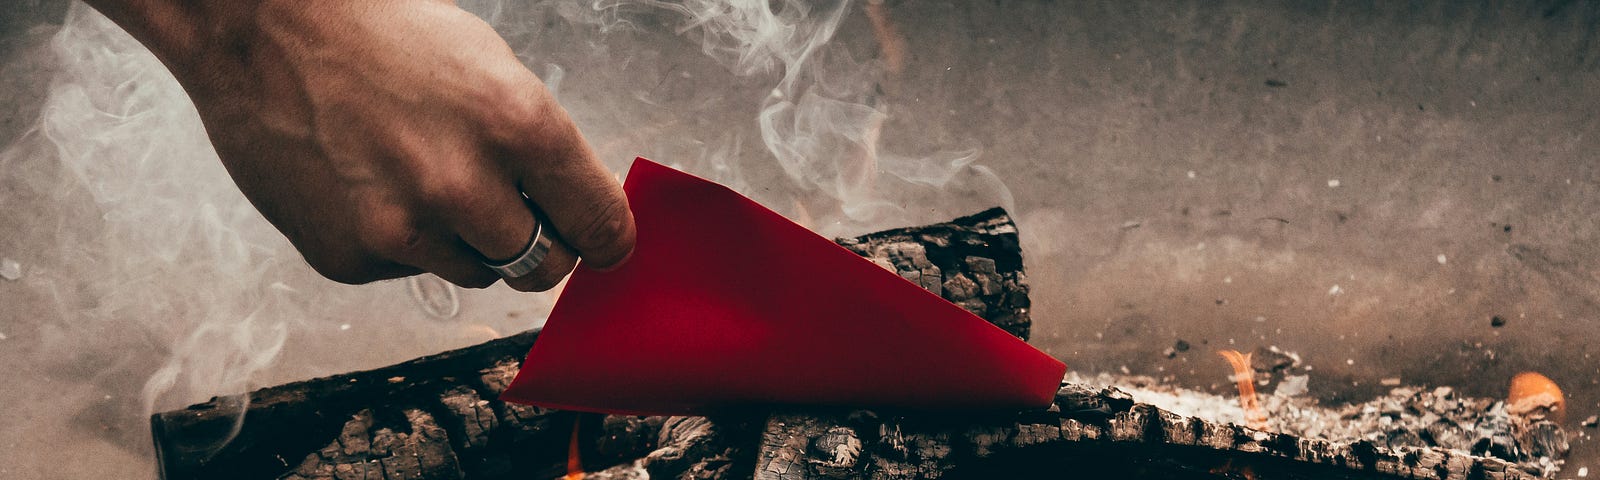 a hand putting a piece of paper into a lit fire.